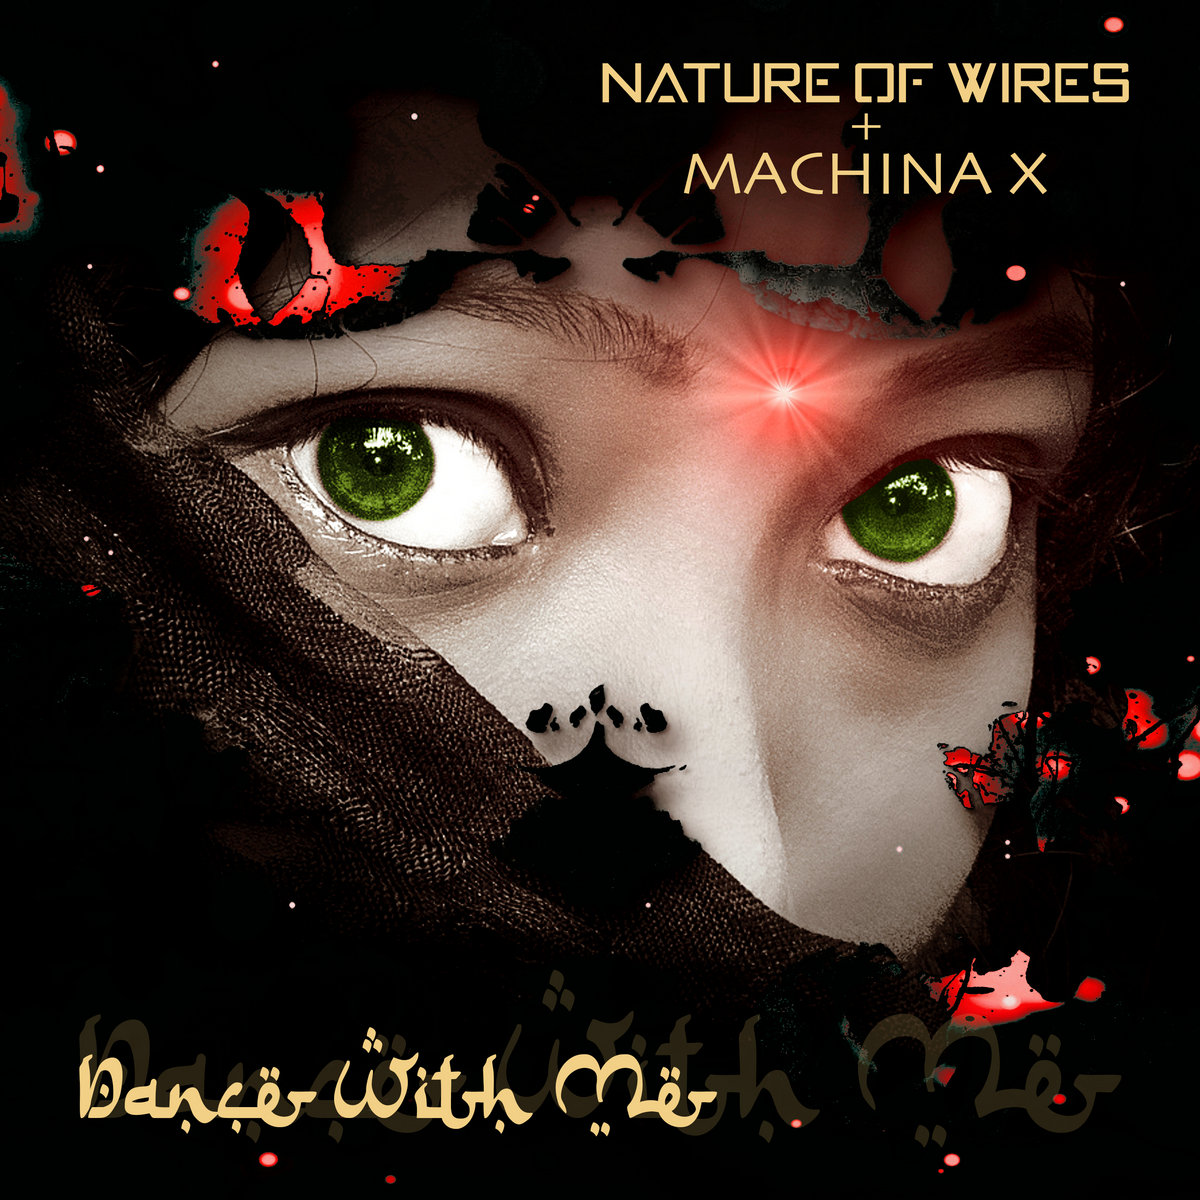 Nature of Wires + Machina X - Dance With Me - Nature of Wires + Machina X - Dance With Me